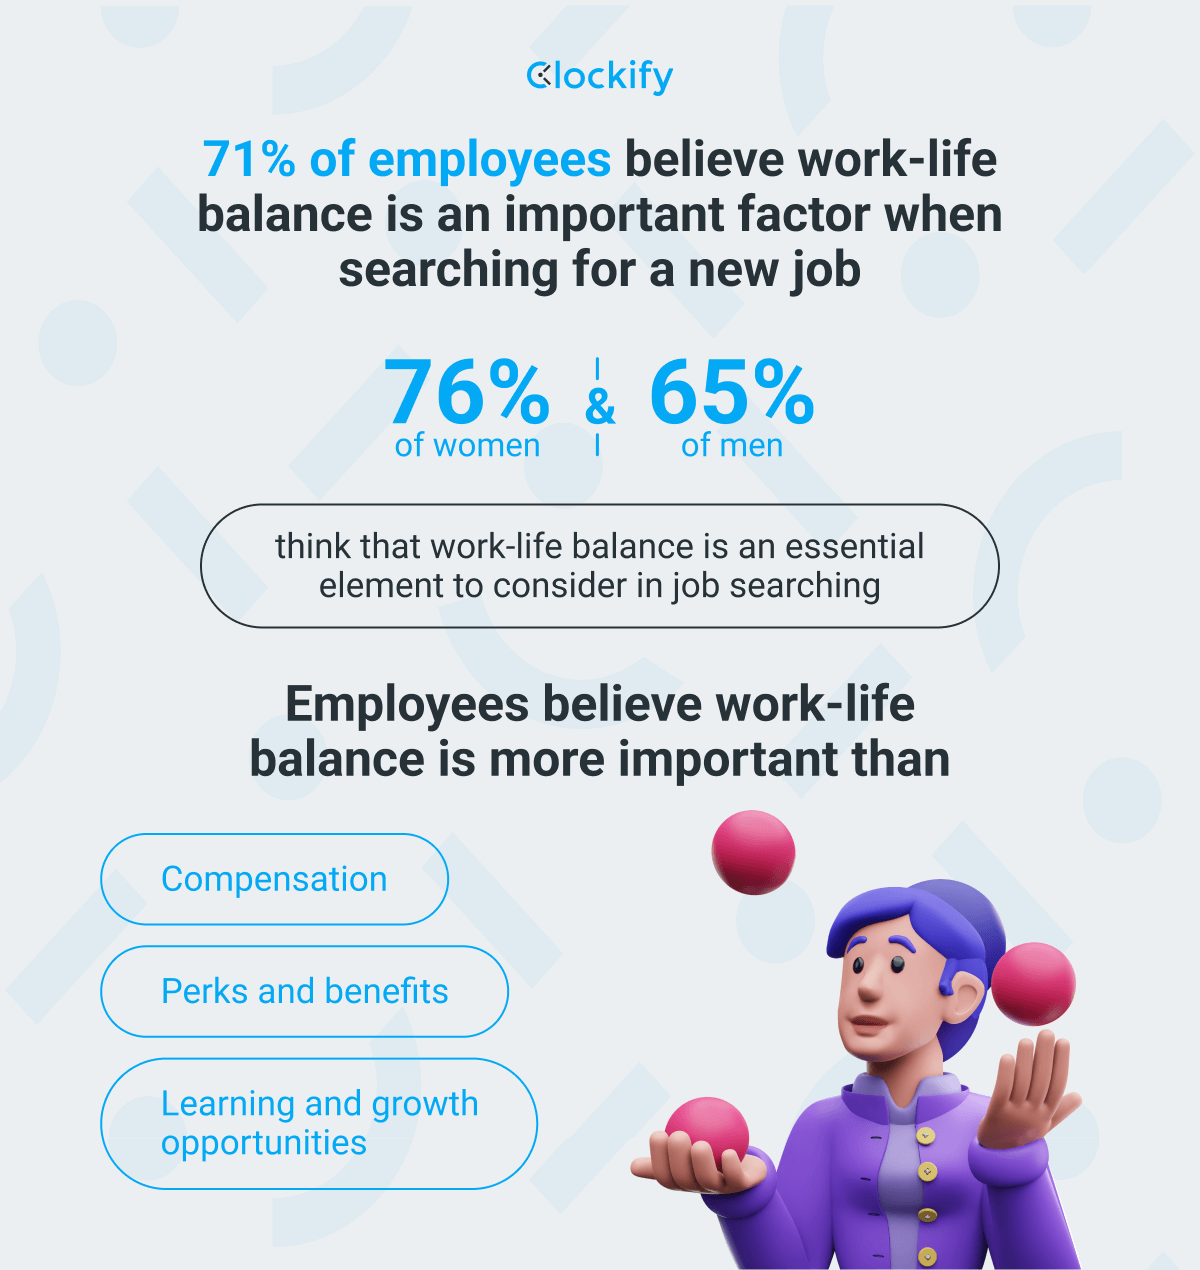 52% of People Want Work-From-Home Jobs for Better Work-Life